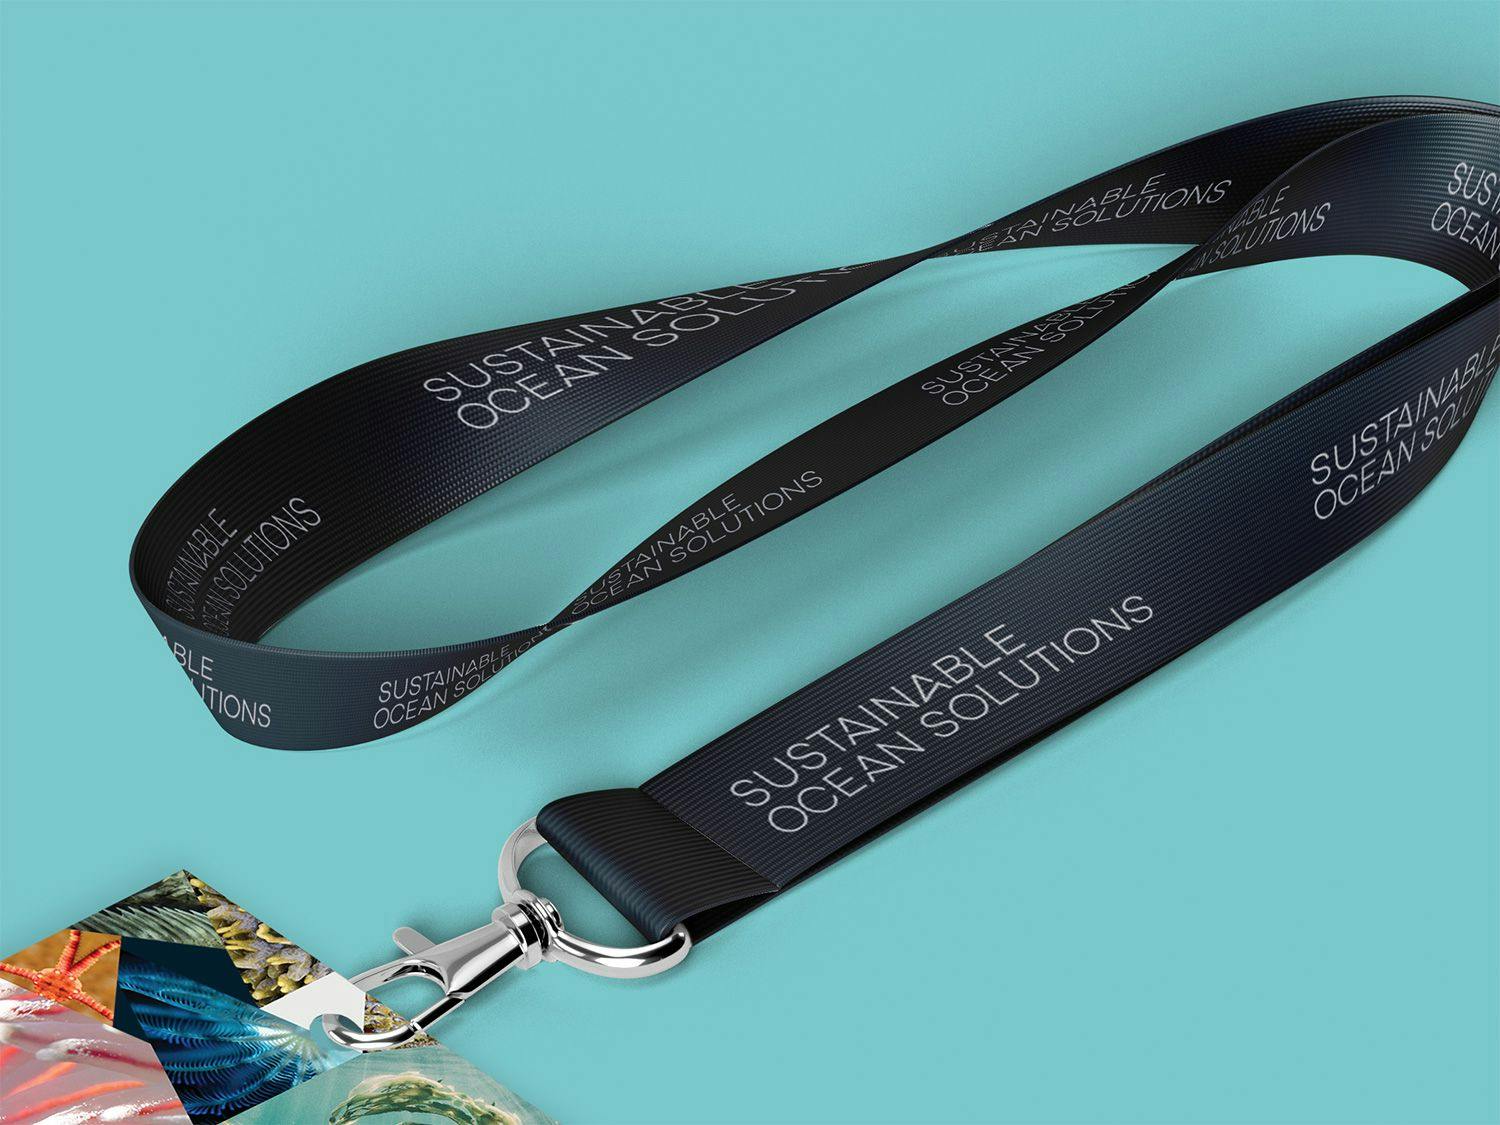 Lanyard Sustainable Oceans Solutions.